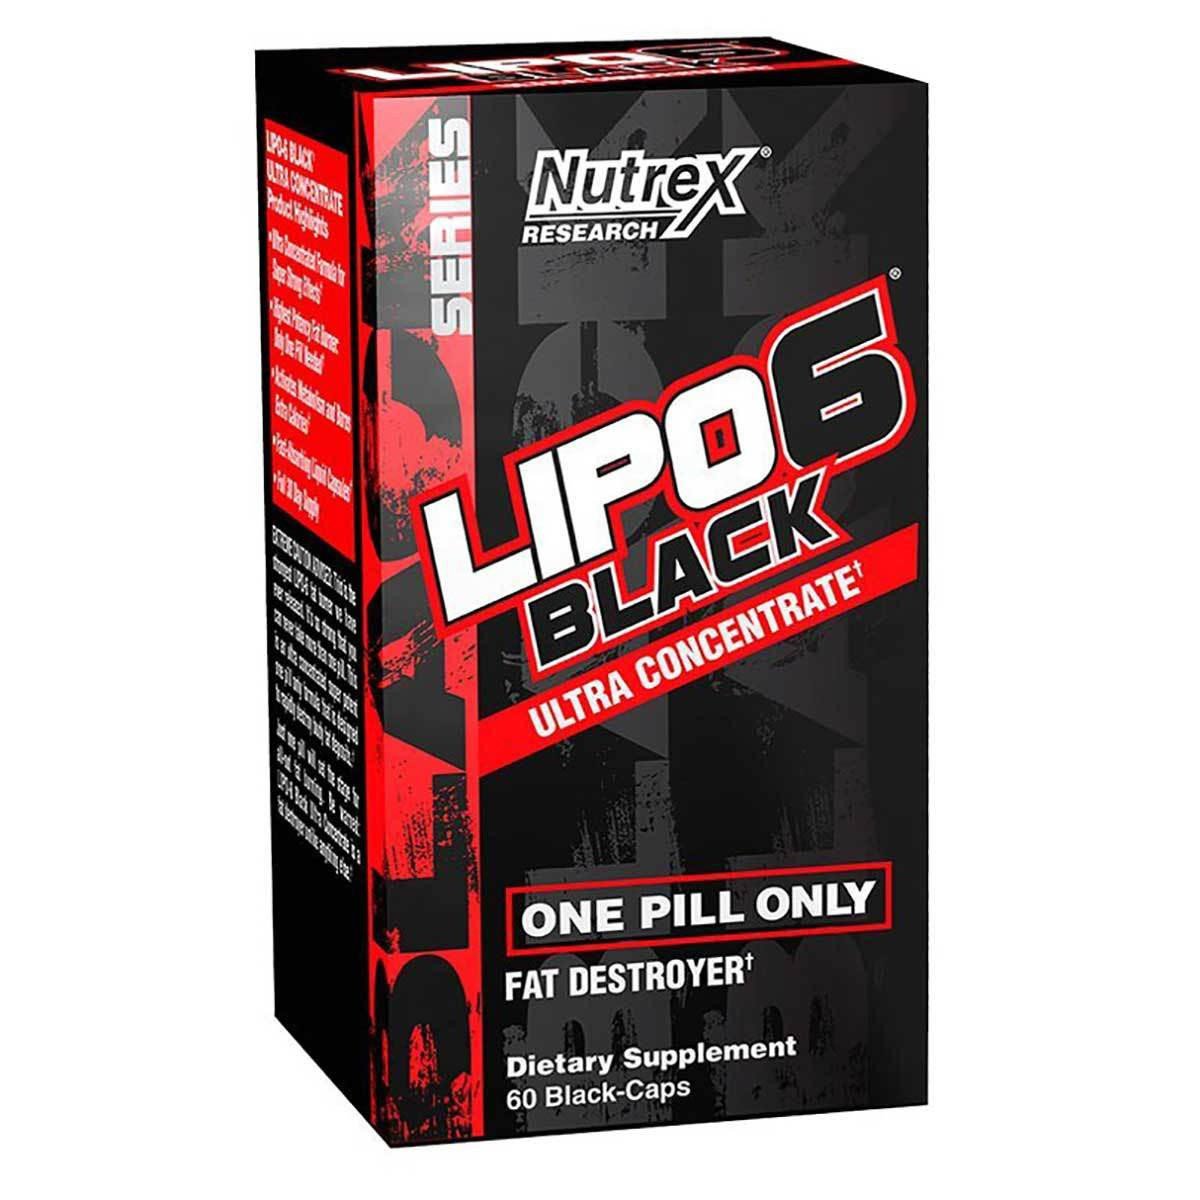 Image of Nutrex Research Lipo 6 Black Ultra Concentrate 60 Black Capsules